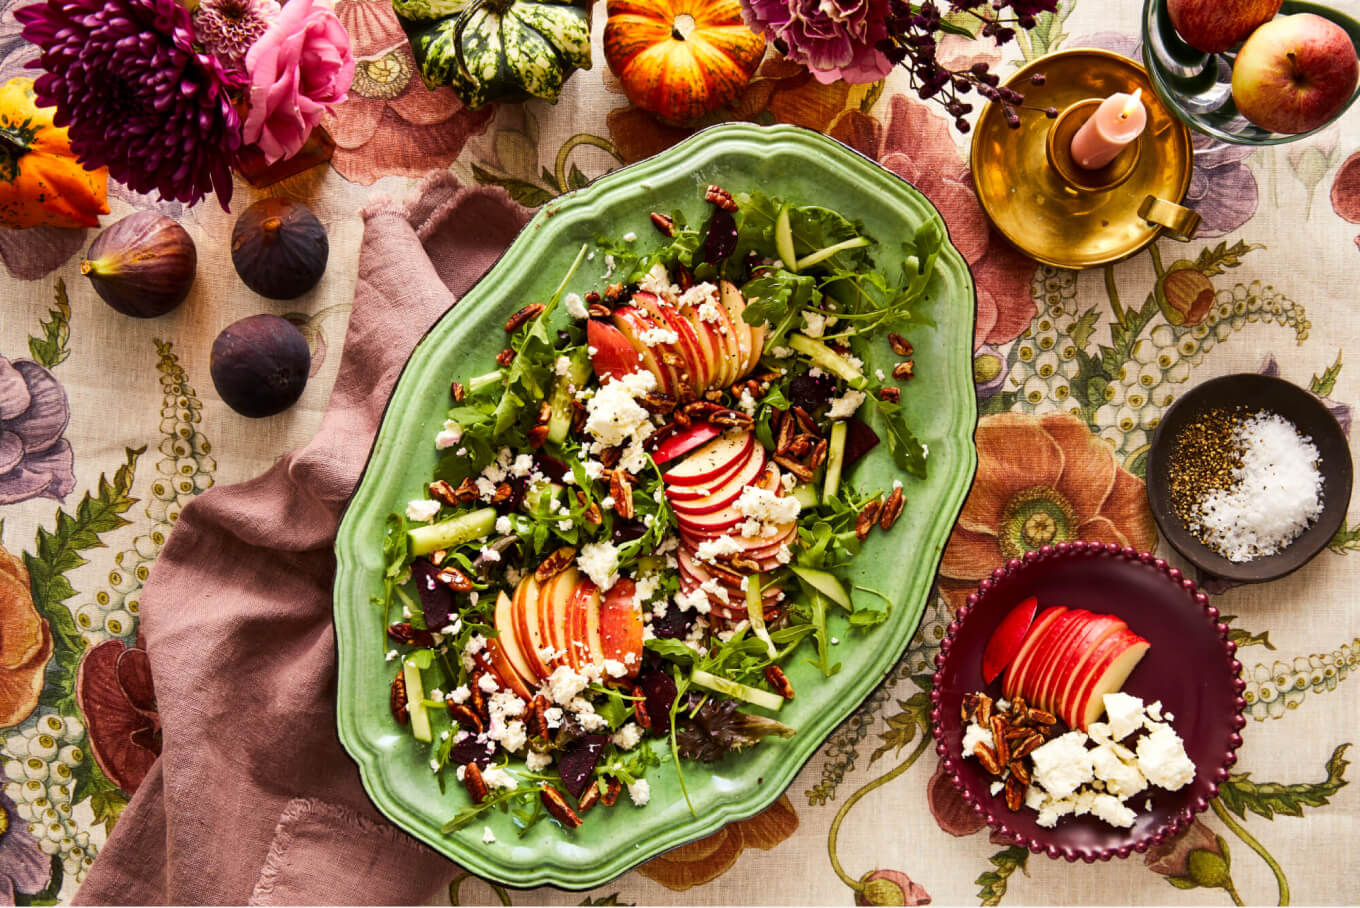 Apple and feta salad in a beautiful green serving platter on an autumnal table with purples, greens, orange, pink